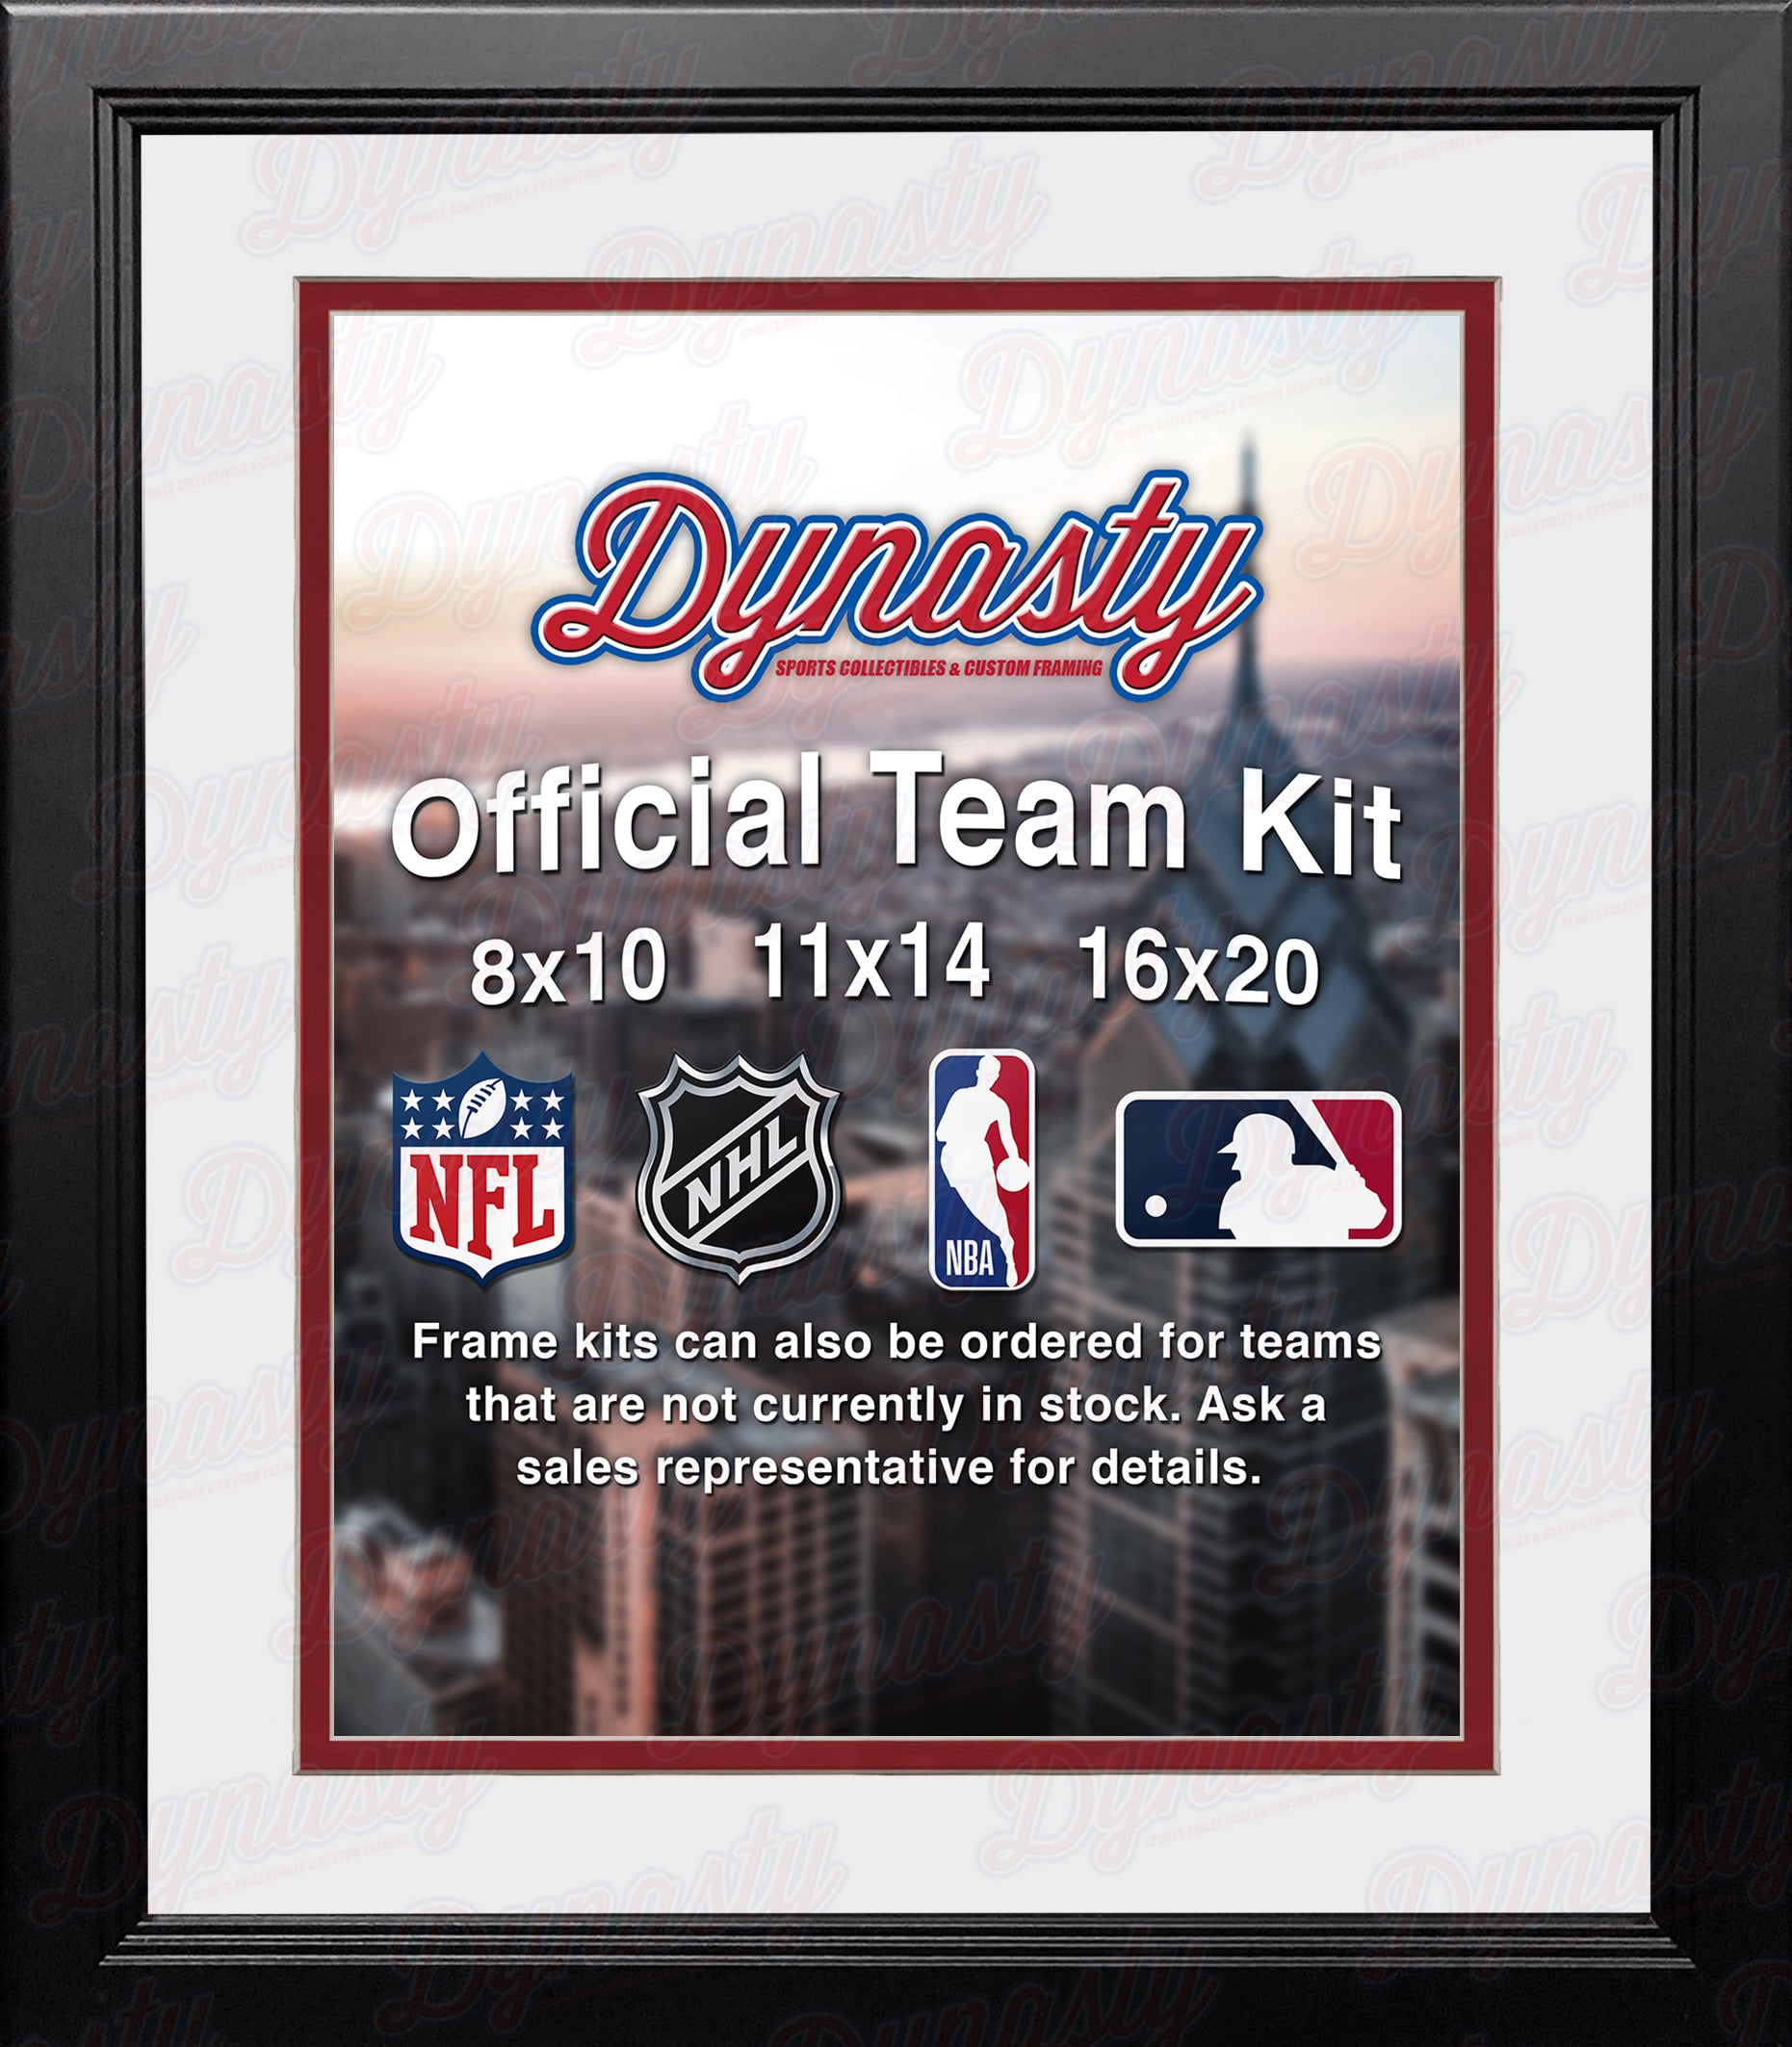 NBA Basketball Photo Picture Frame Kit - Los Angeles Clippers (White Matting, Red Trim) - Dynasty Sports & Framing 